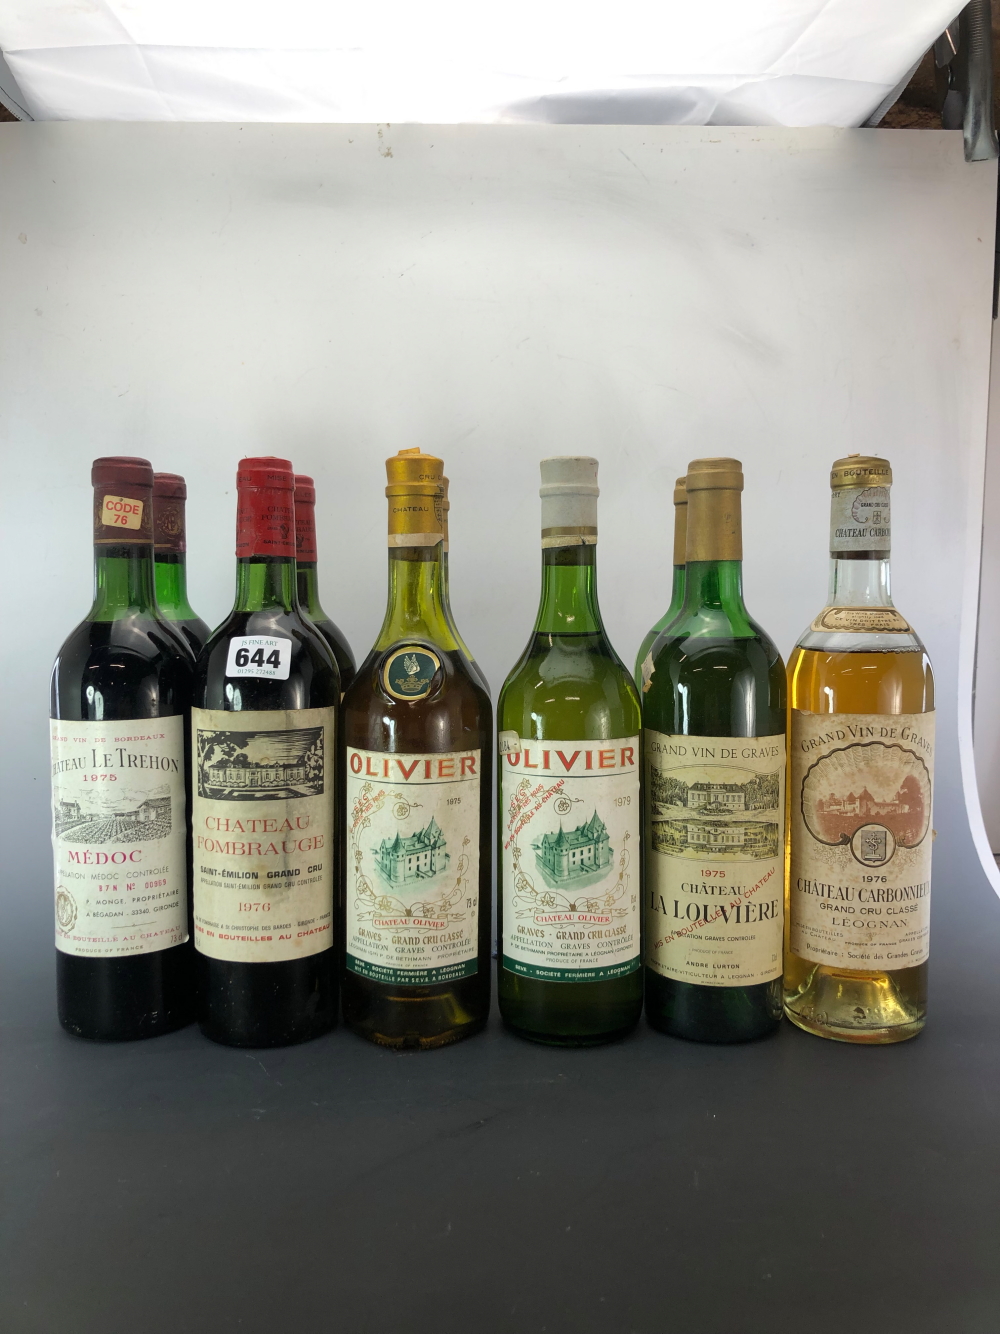 A COLLECTION OF 10 BOTTLES 1970S BORDEAUX WINE TO INCLUDE CHATEAU OLIVIER BLANC GRAVES GRAND CRU